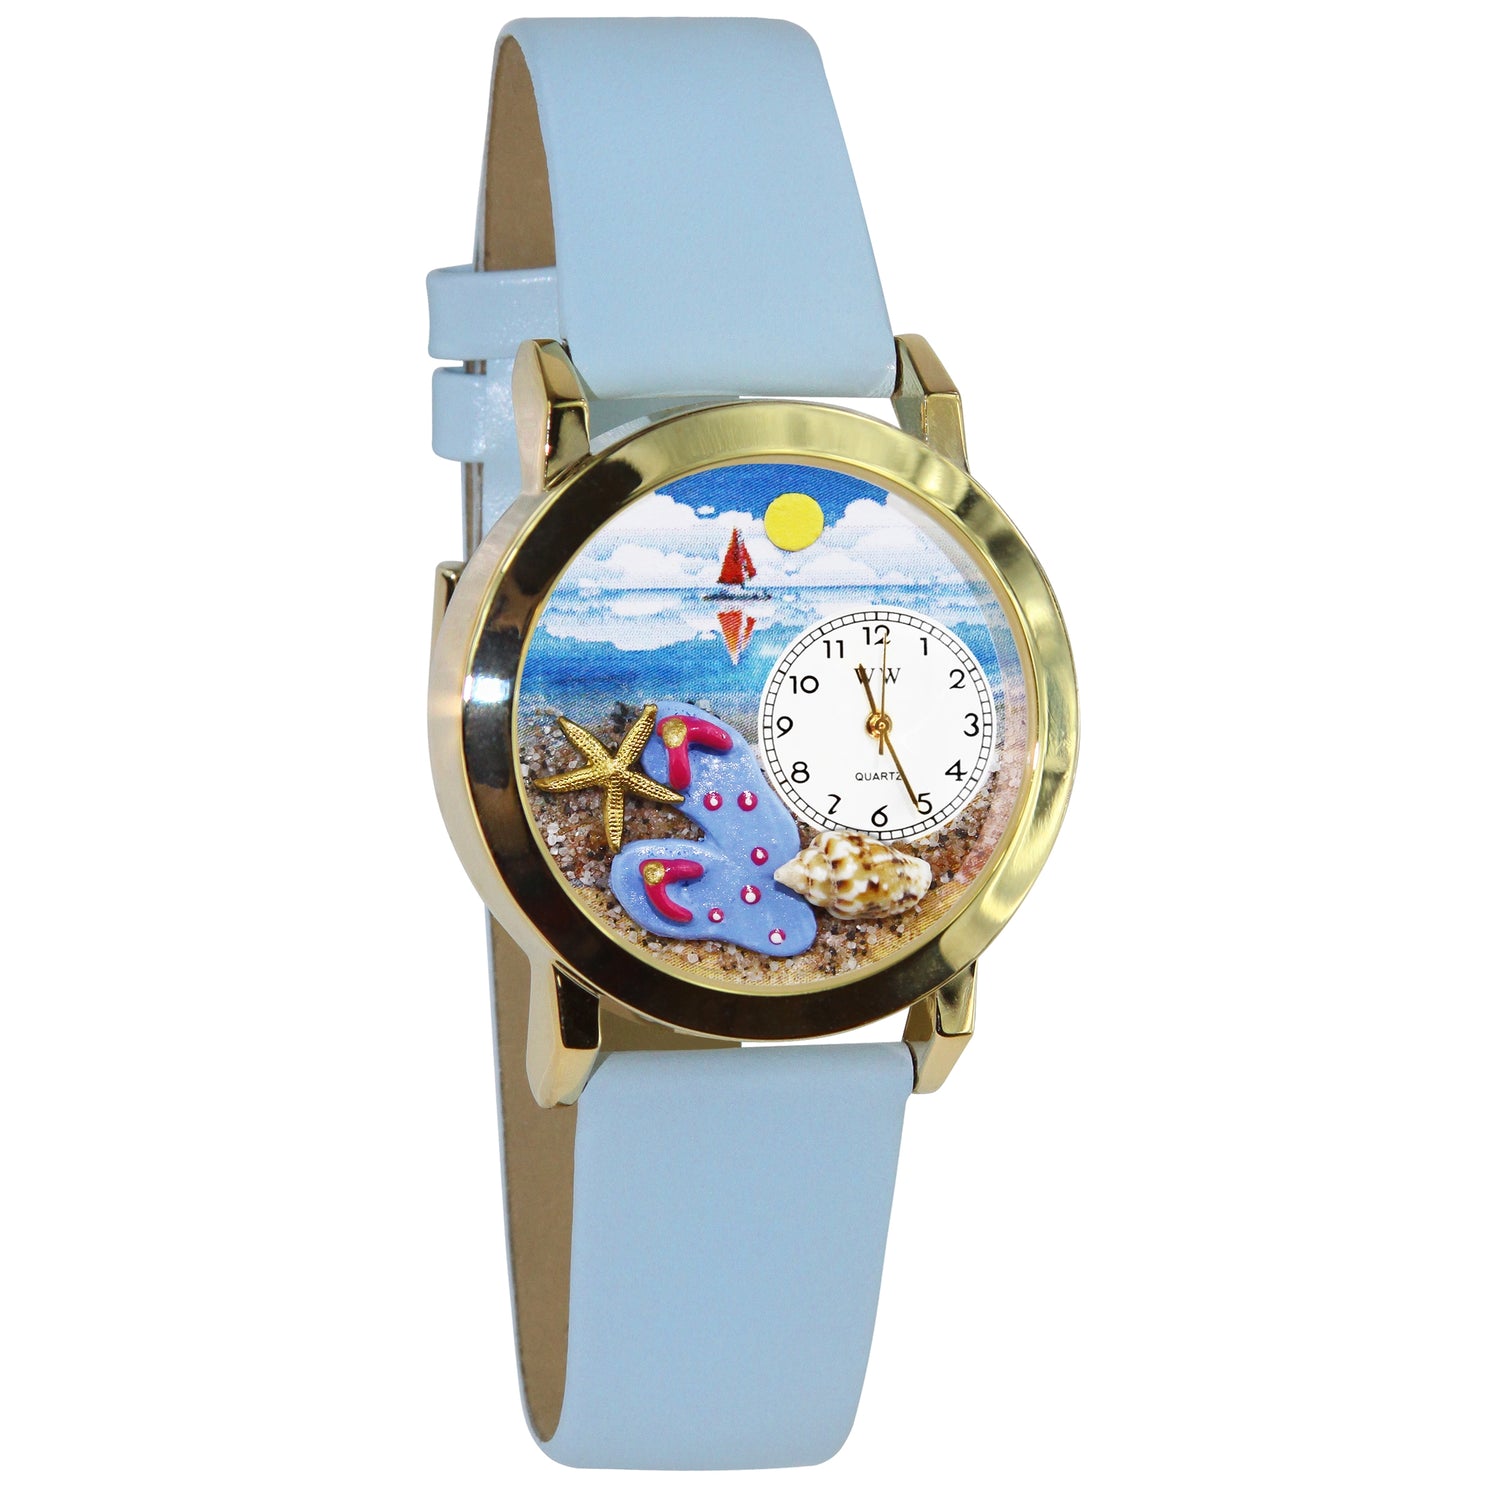 Whimsical Gifts | Flip-flops 3D Watch Small Style | Handmade in USA | Holiday & Seasonal Themed | Spring & Summer Fun | Novelty Unique Fun Miniatures Gift | Gold Finish Light Blue Leather Watch Band